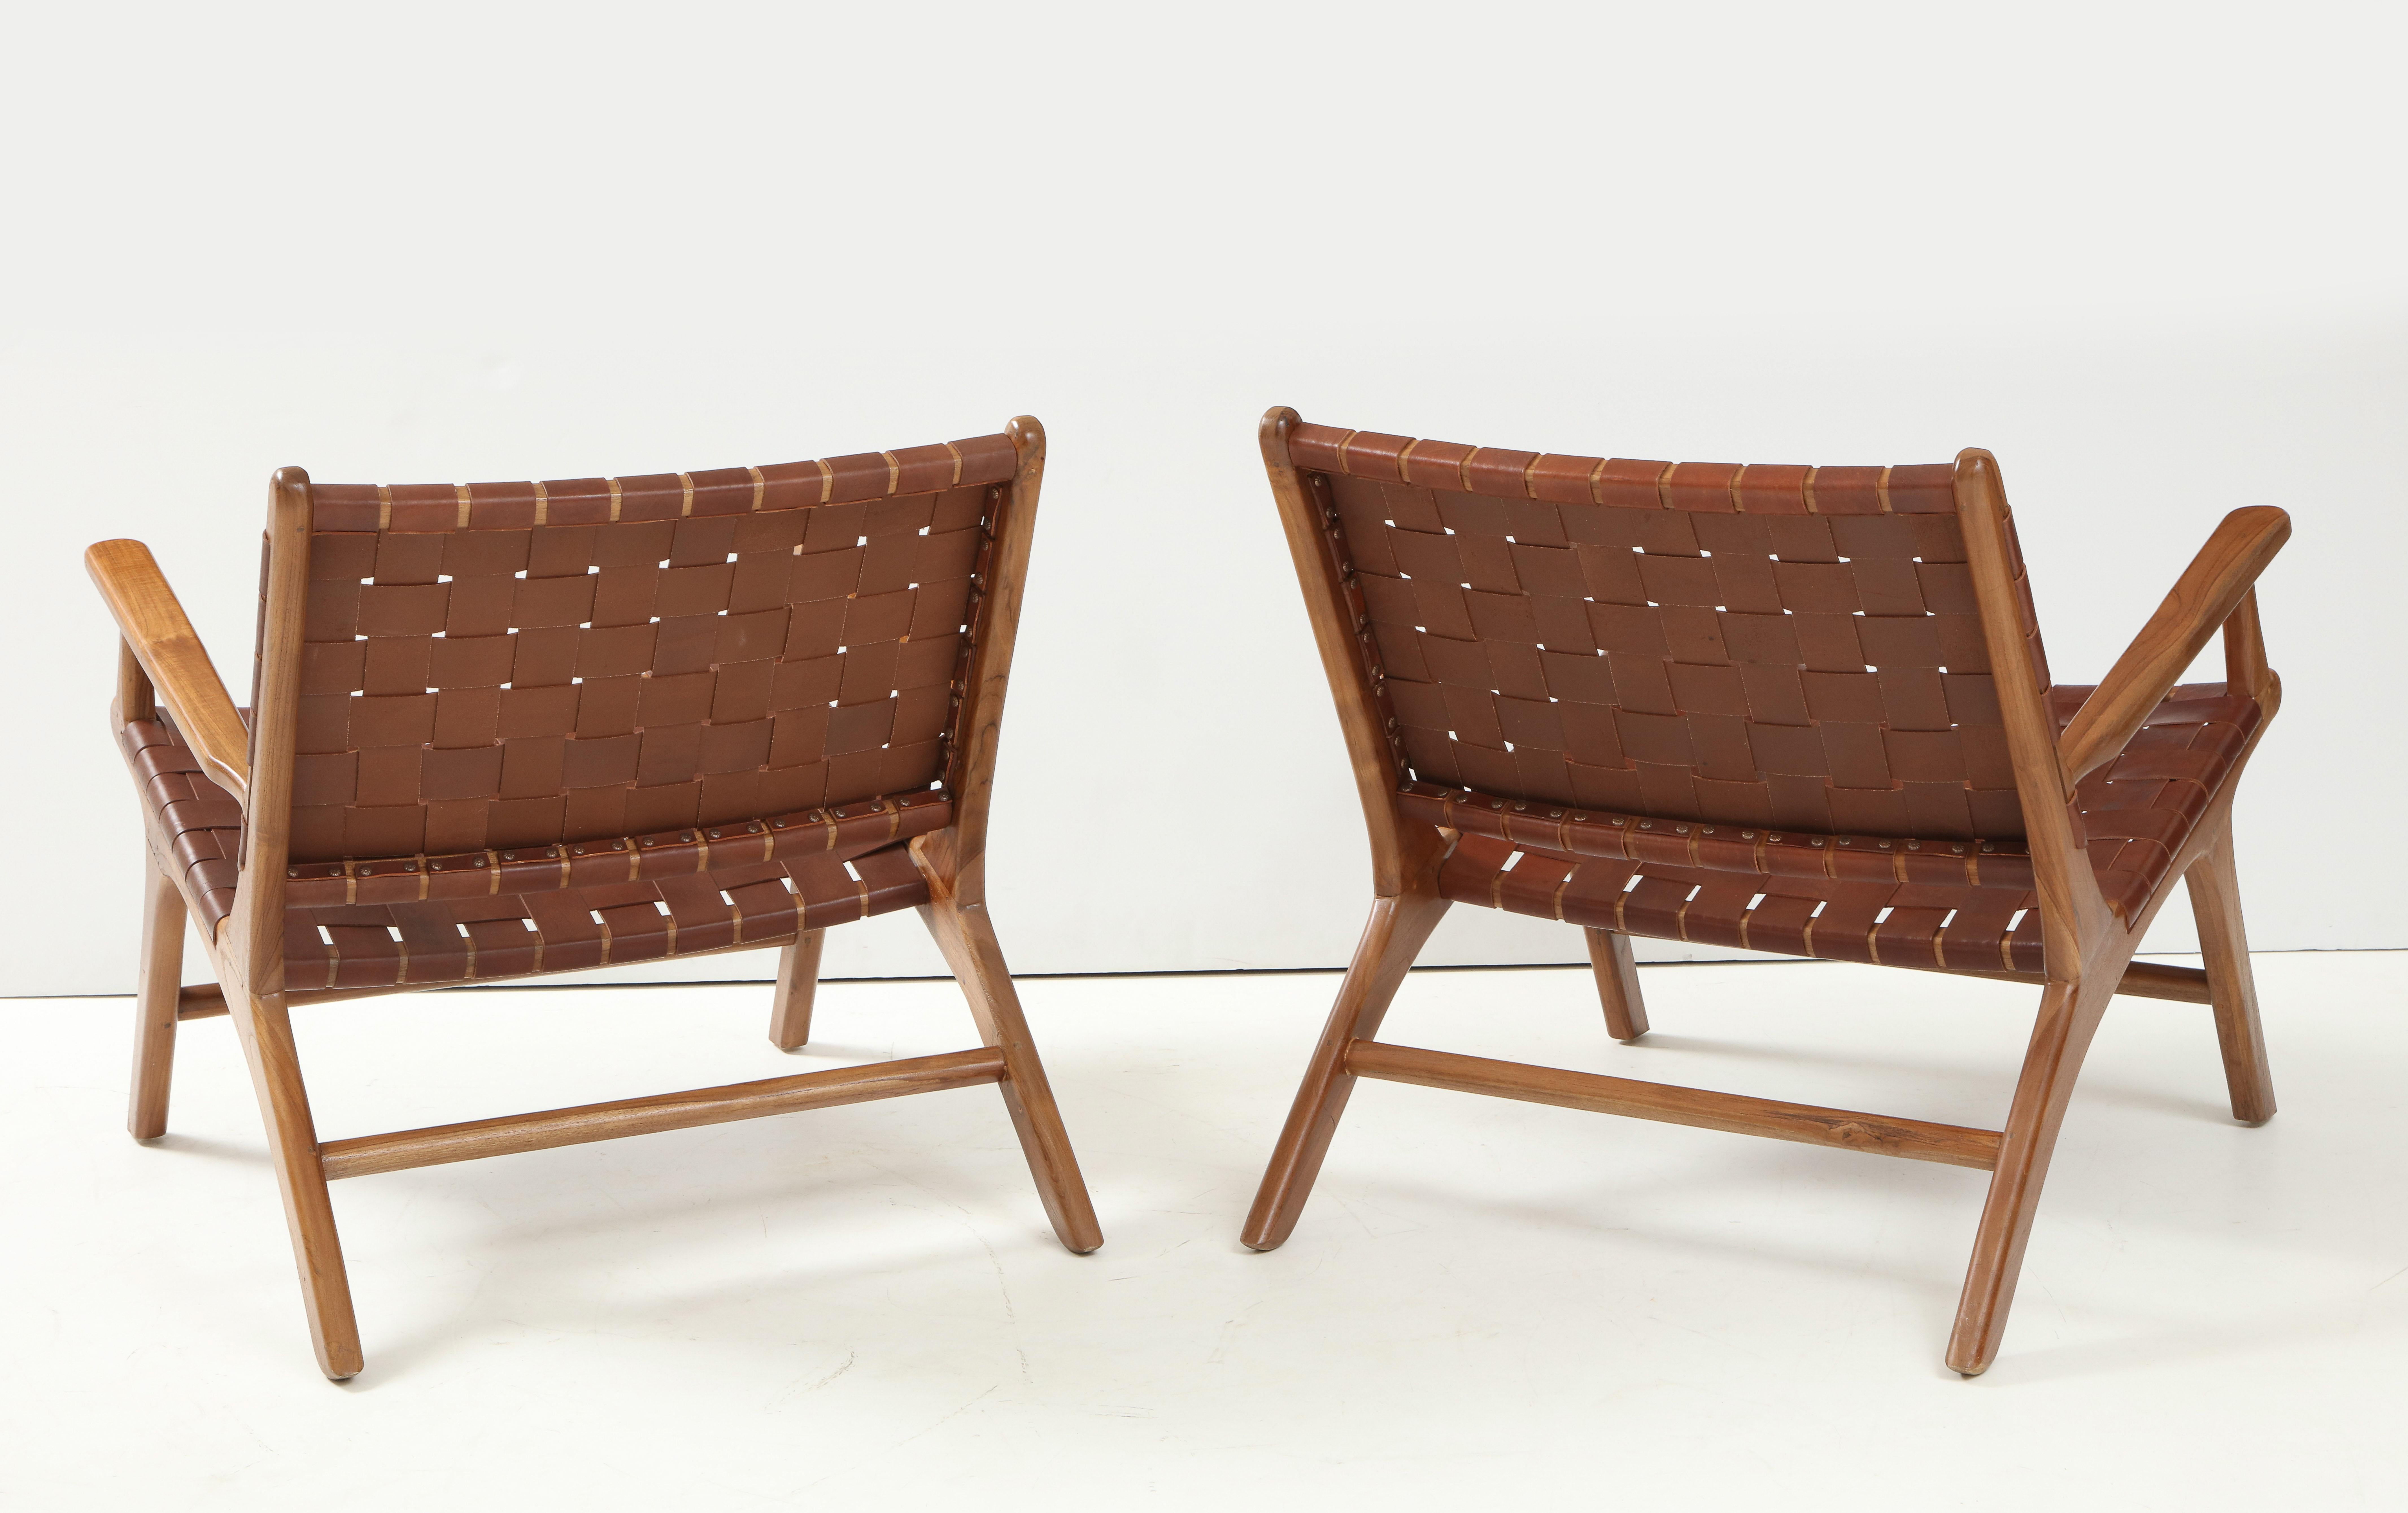 Modern Olivier De Schrijver, 'Hollywood' Leather Armchairs, Belgium, Signed & Numbered